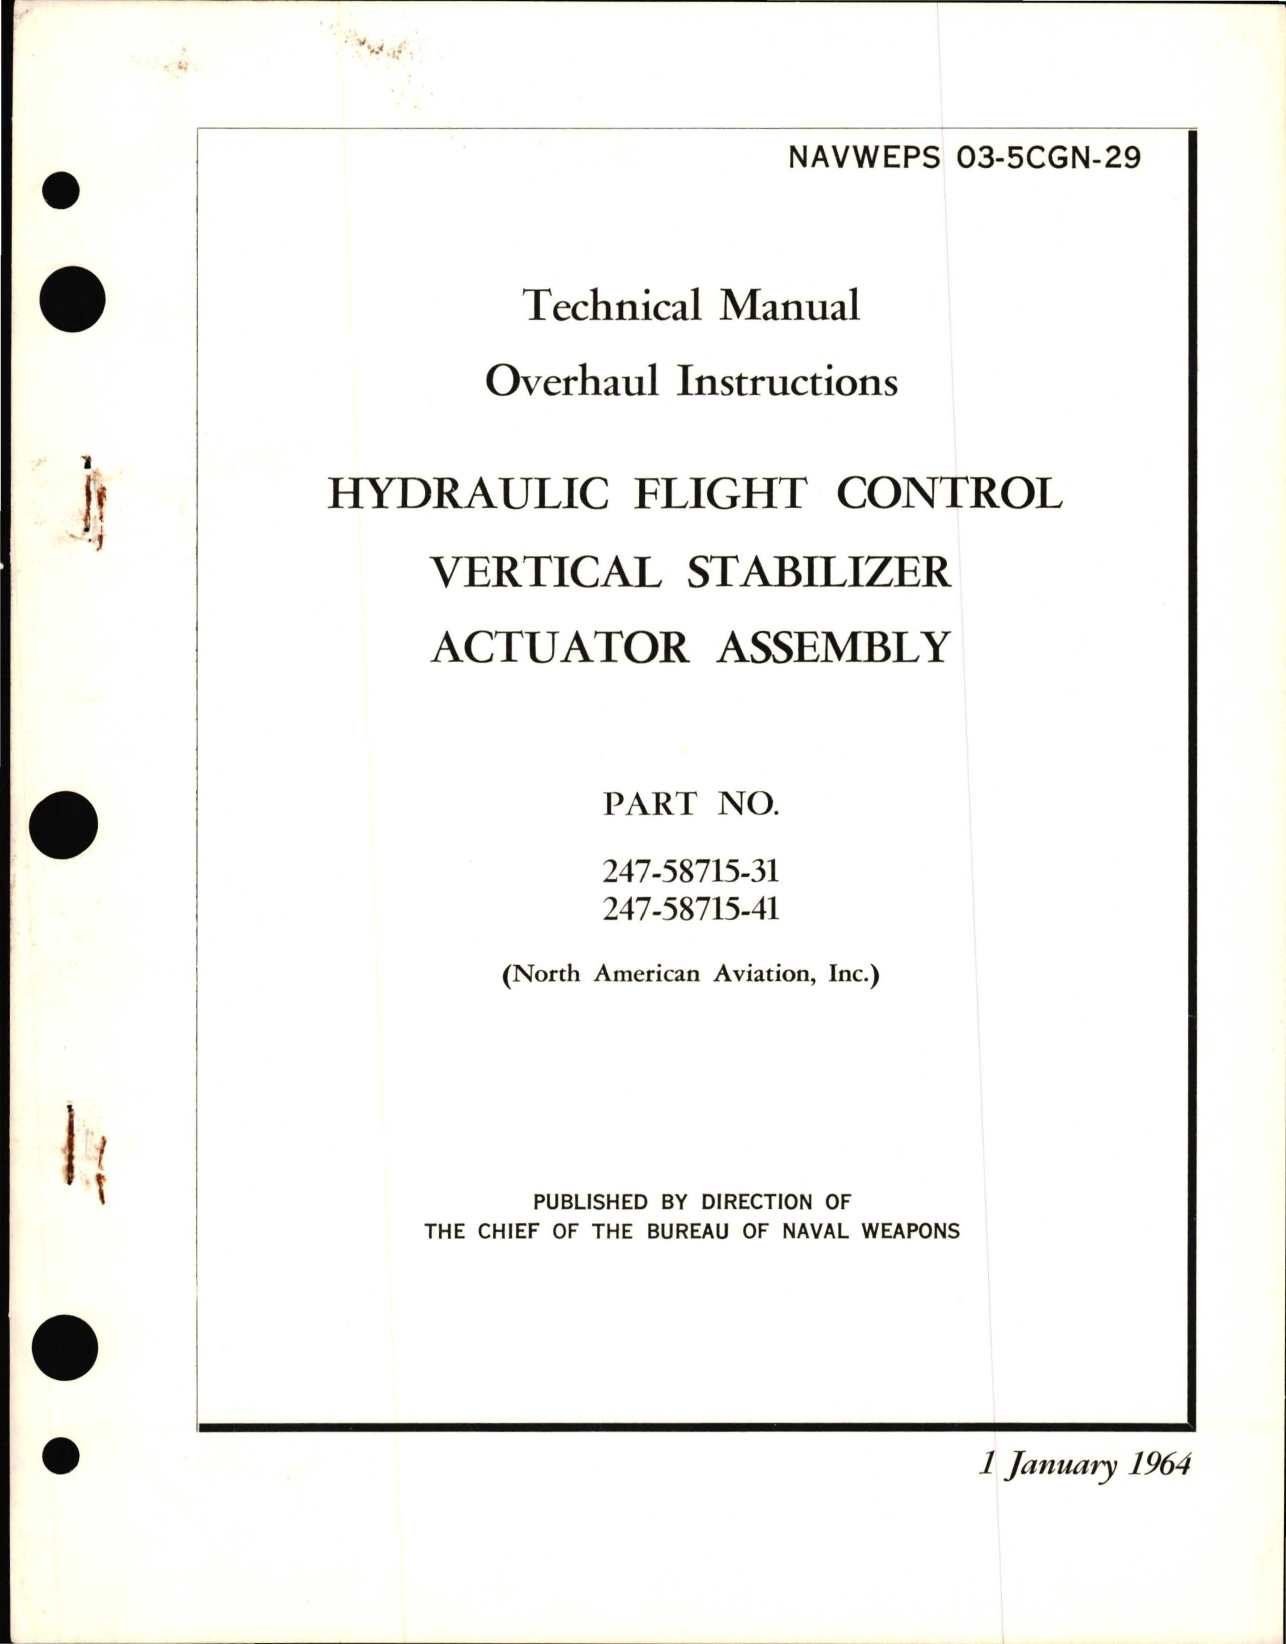 Sample page 1 from AirCorps Library document: Overhaul Instructions for Hydraulic Flight Control, Vertical Stabilizer Actuator Assembly - Part 247-58715-31 and 247-58715-41